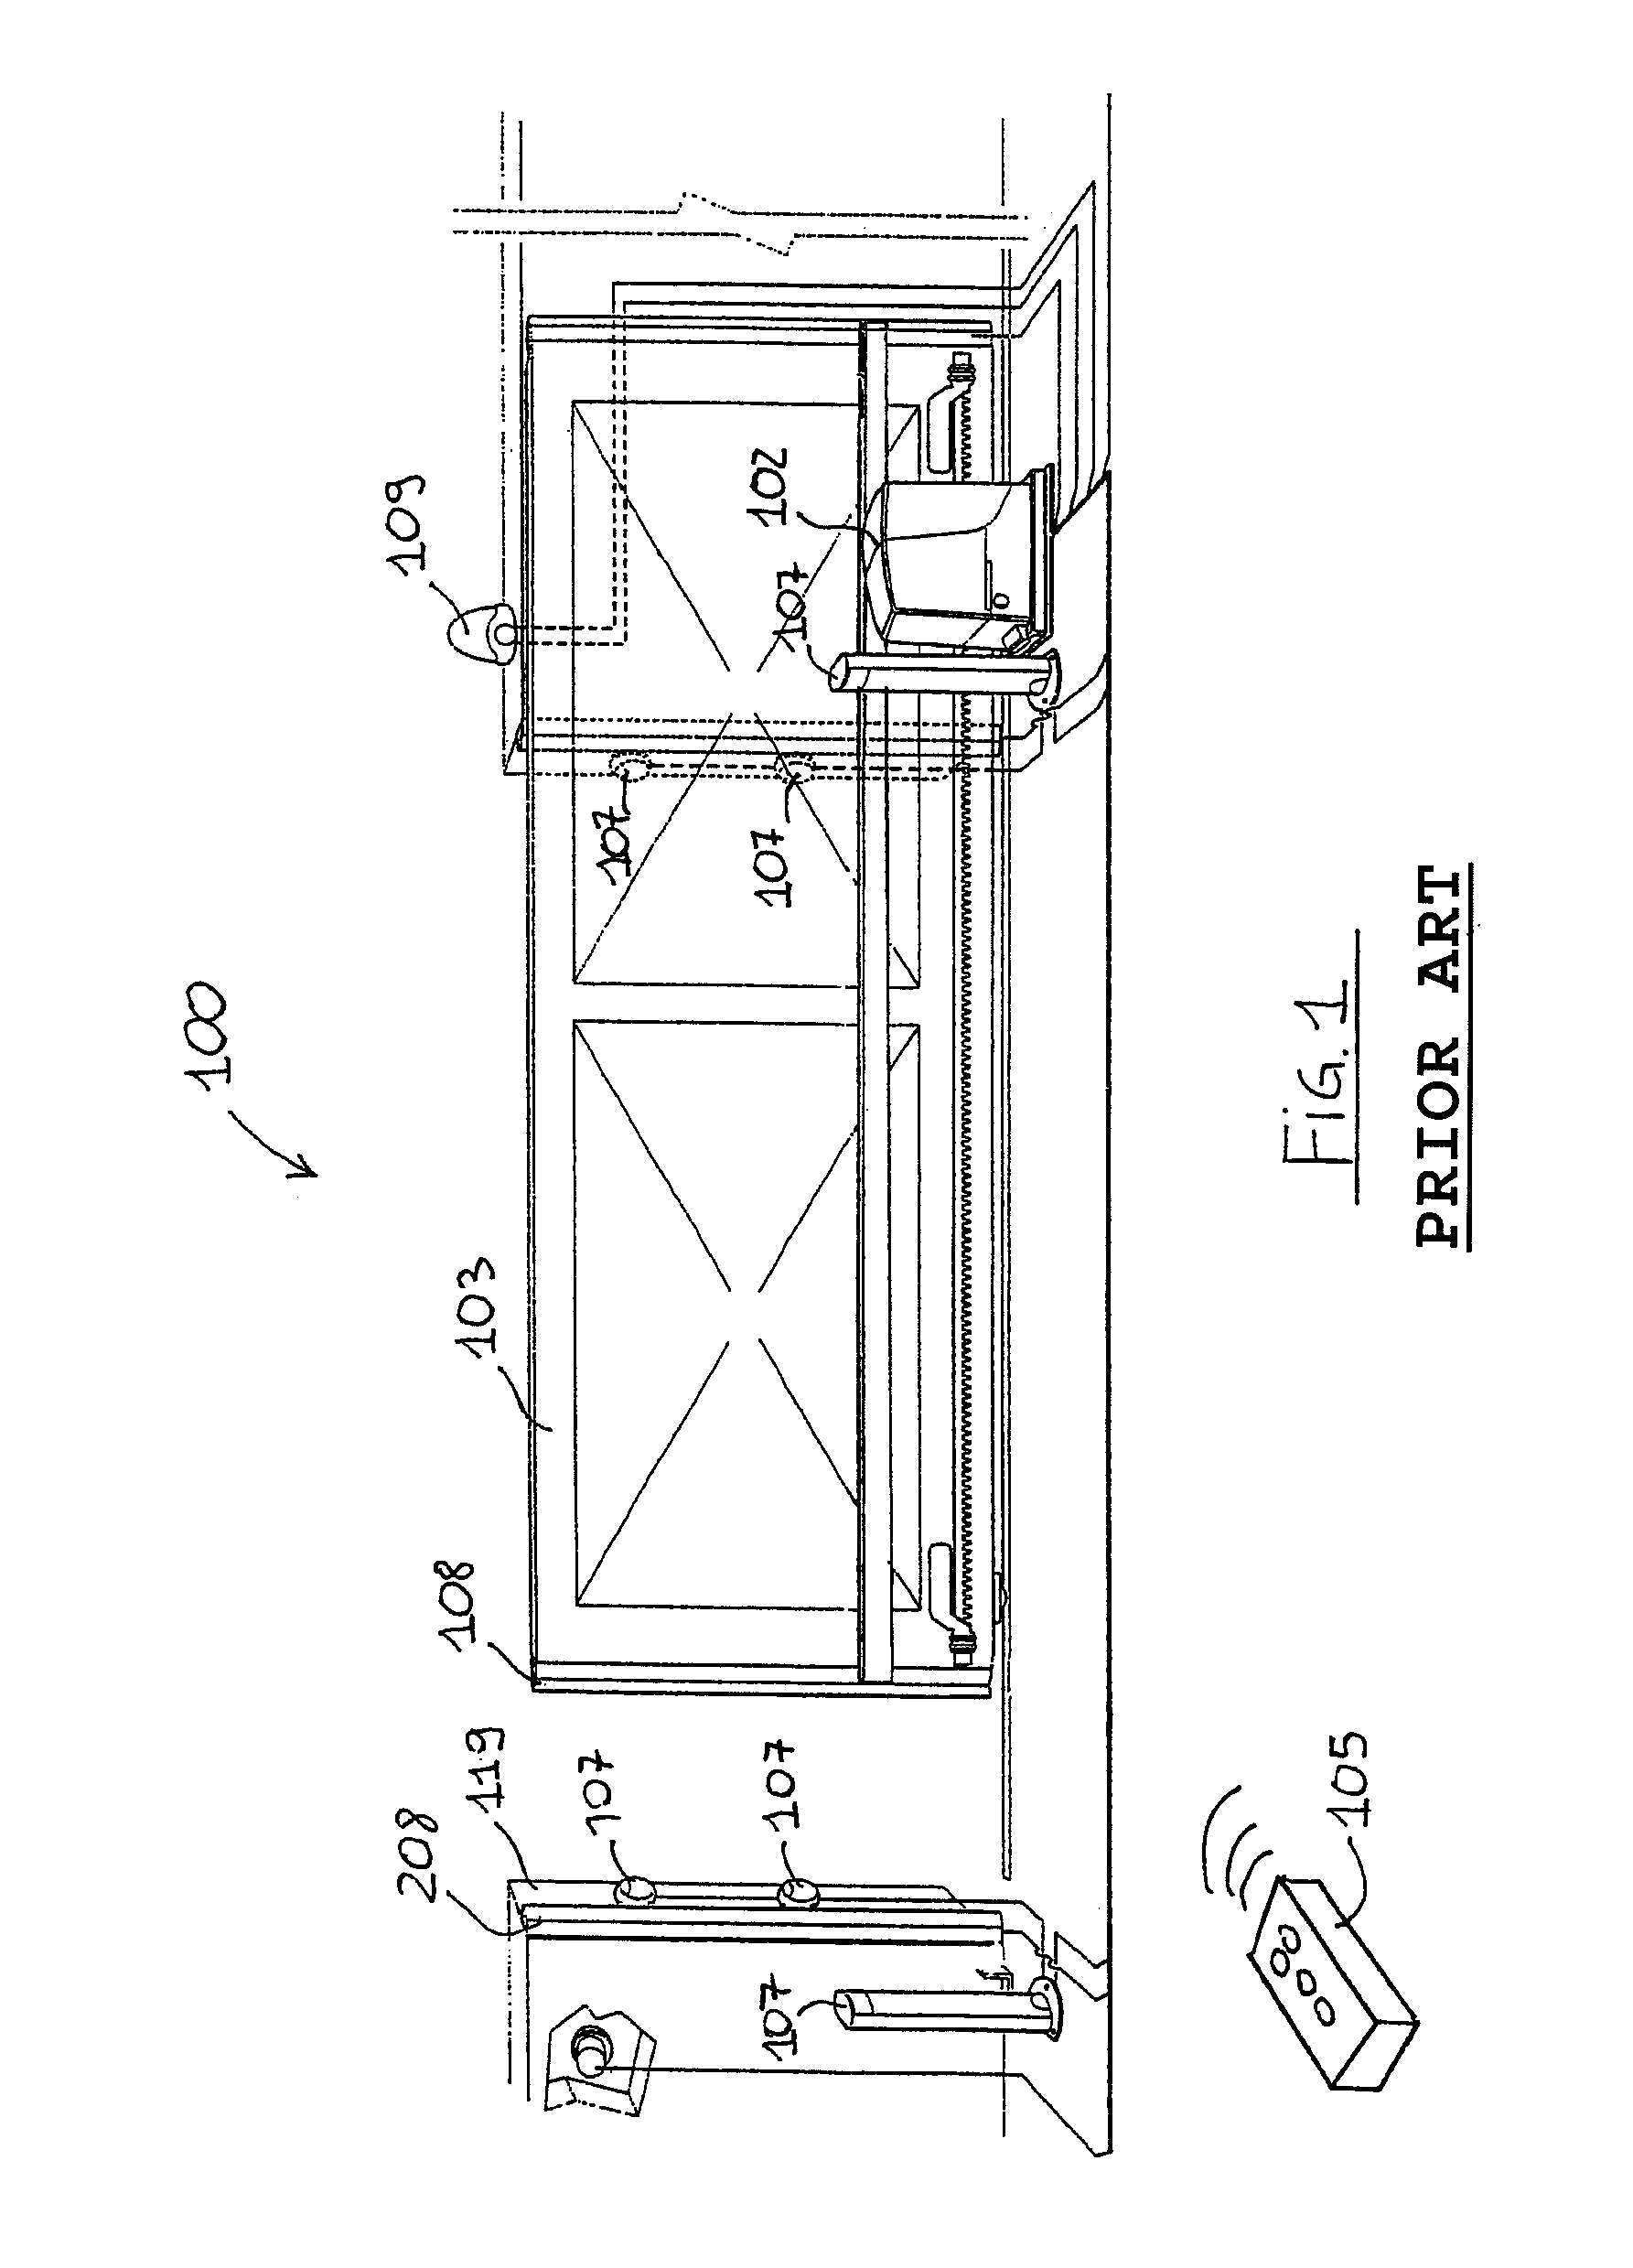 Method and device for automatic systems designed to operate movable barriers